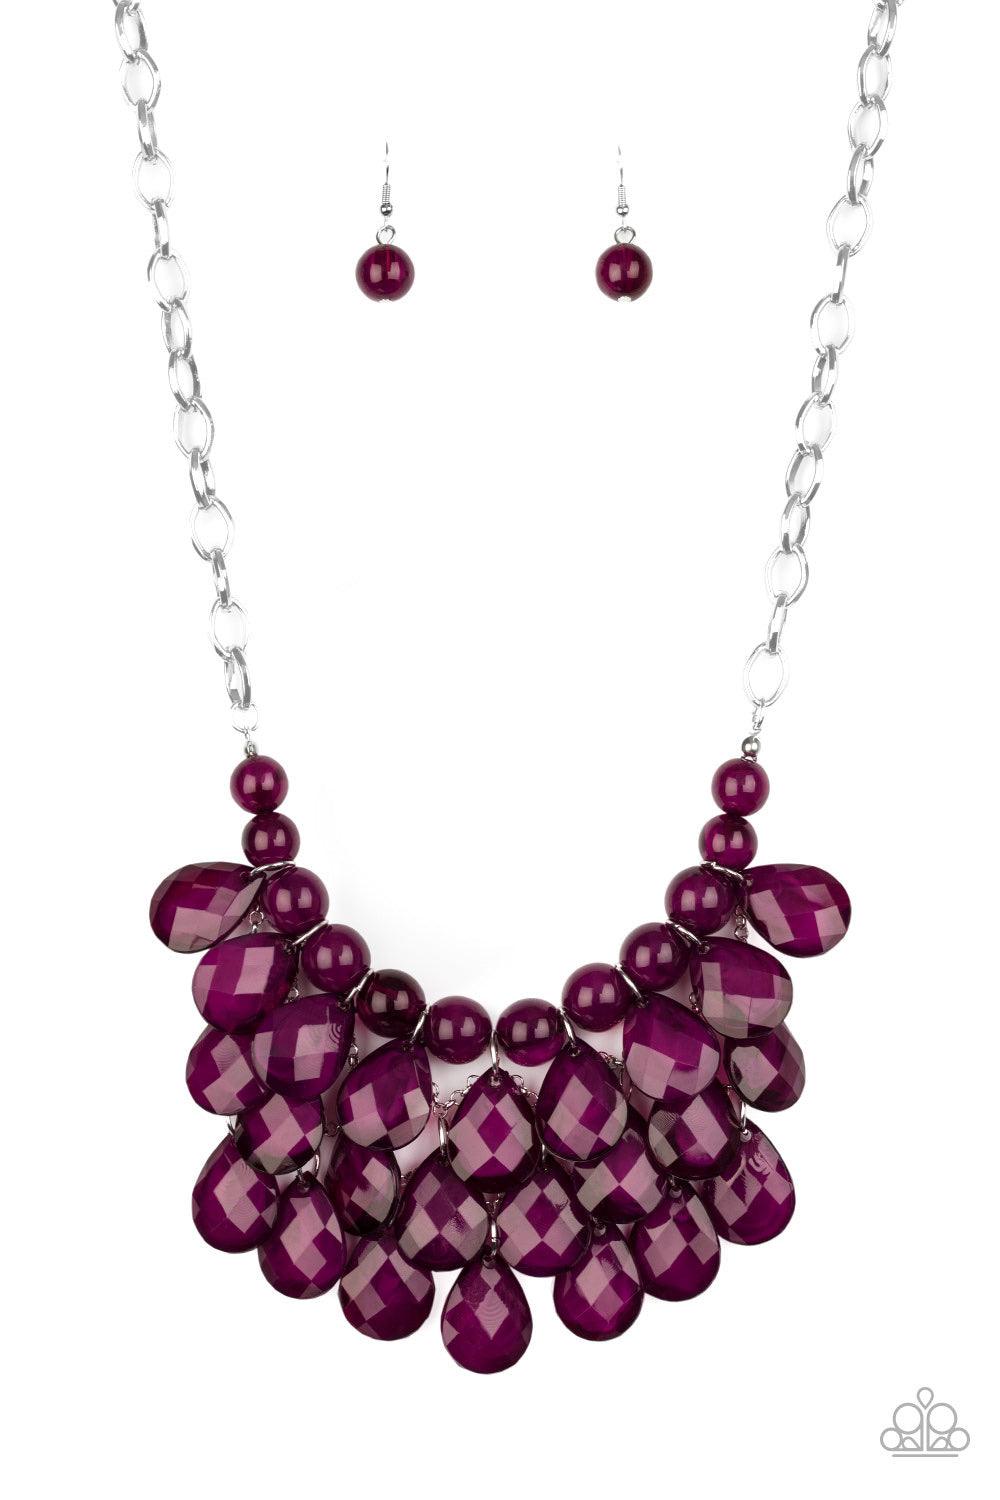 Paparazzi Accessories Sorry To Burst Your Bubble - Purple Attached to a bold silver chain, round opaque plum beads are threaded along an invisible wire below the collar. Attached to a net of silver chains, faceted opaque teardrops cascade from the bottom